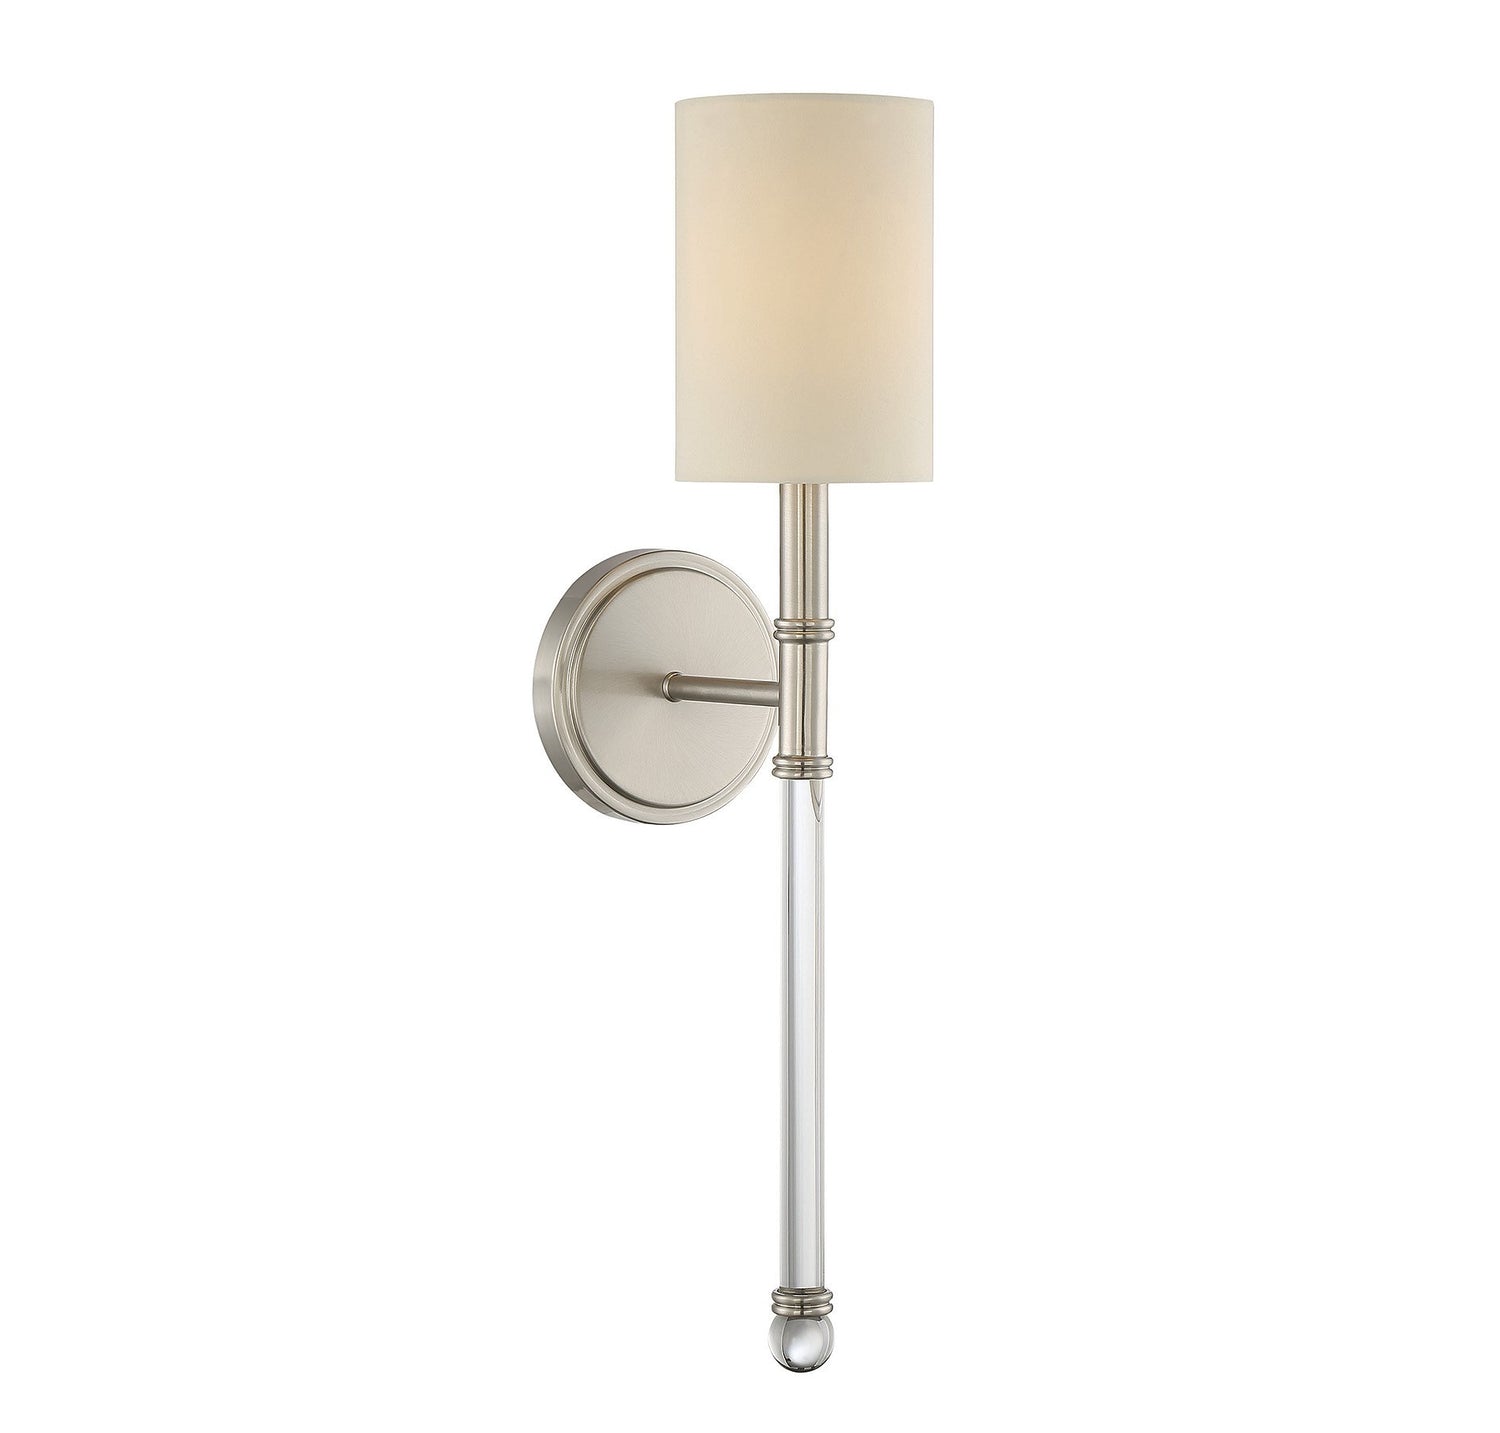 Savoy House Fremont 1 Light Wall Sconce in Satin Nickel and Soft White Fabric Shade 9-101-1-SN